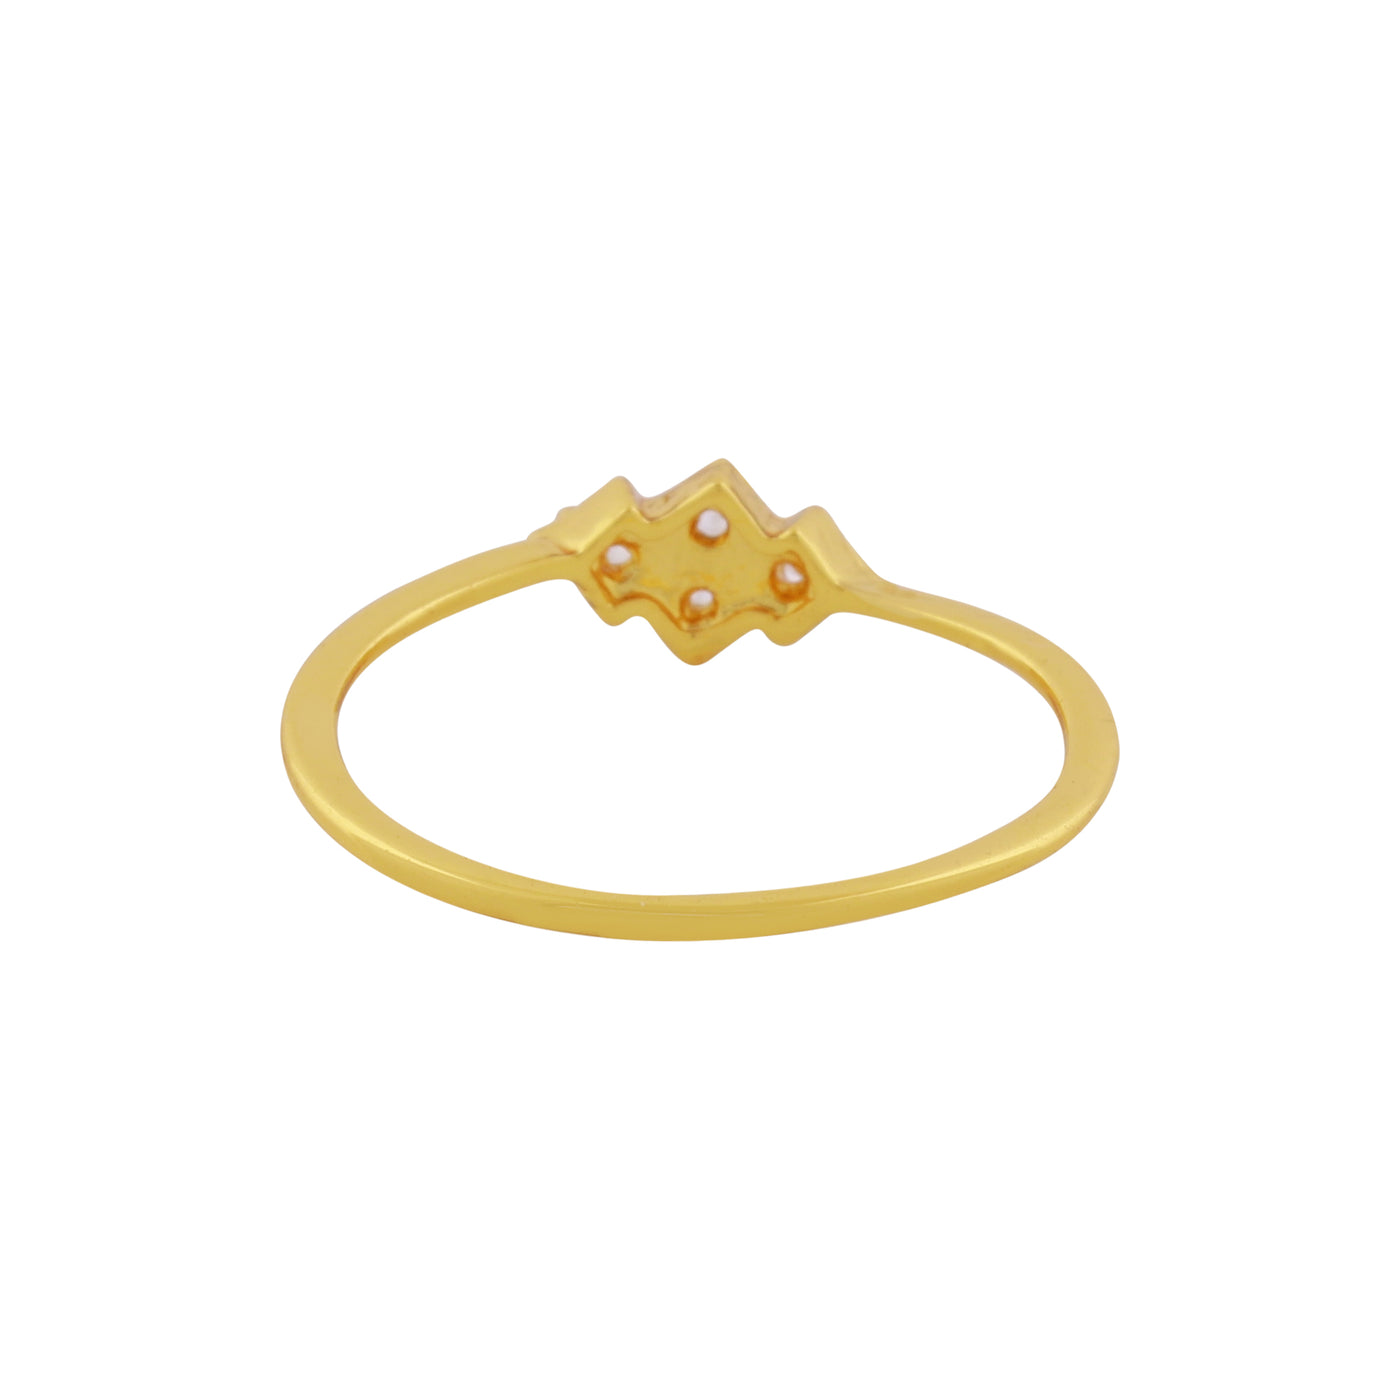 Estele american diamond and gold plated fancy ring for women( non adjustable)